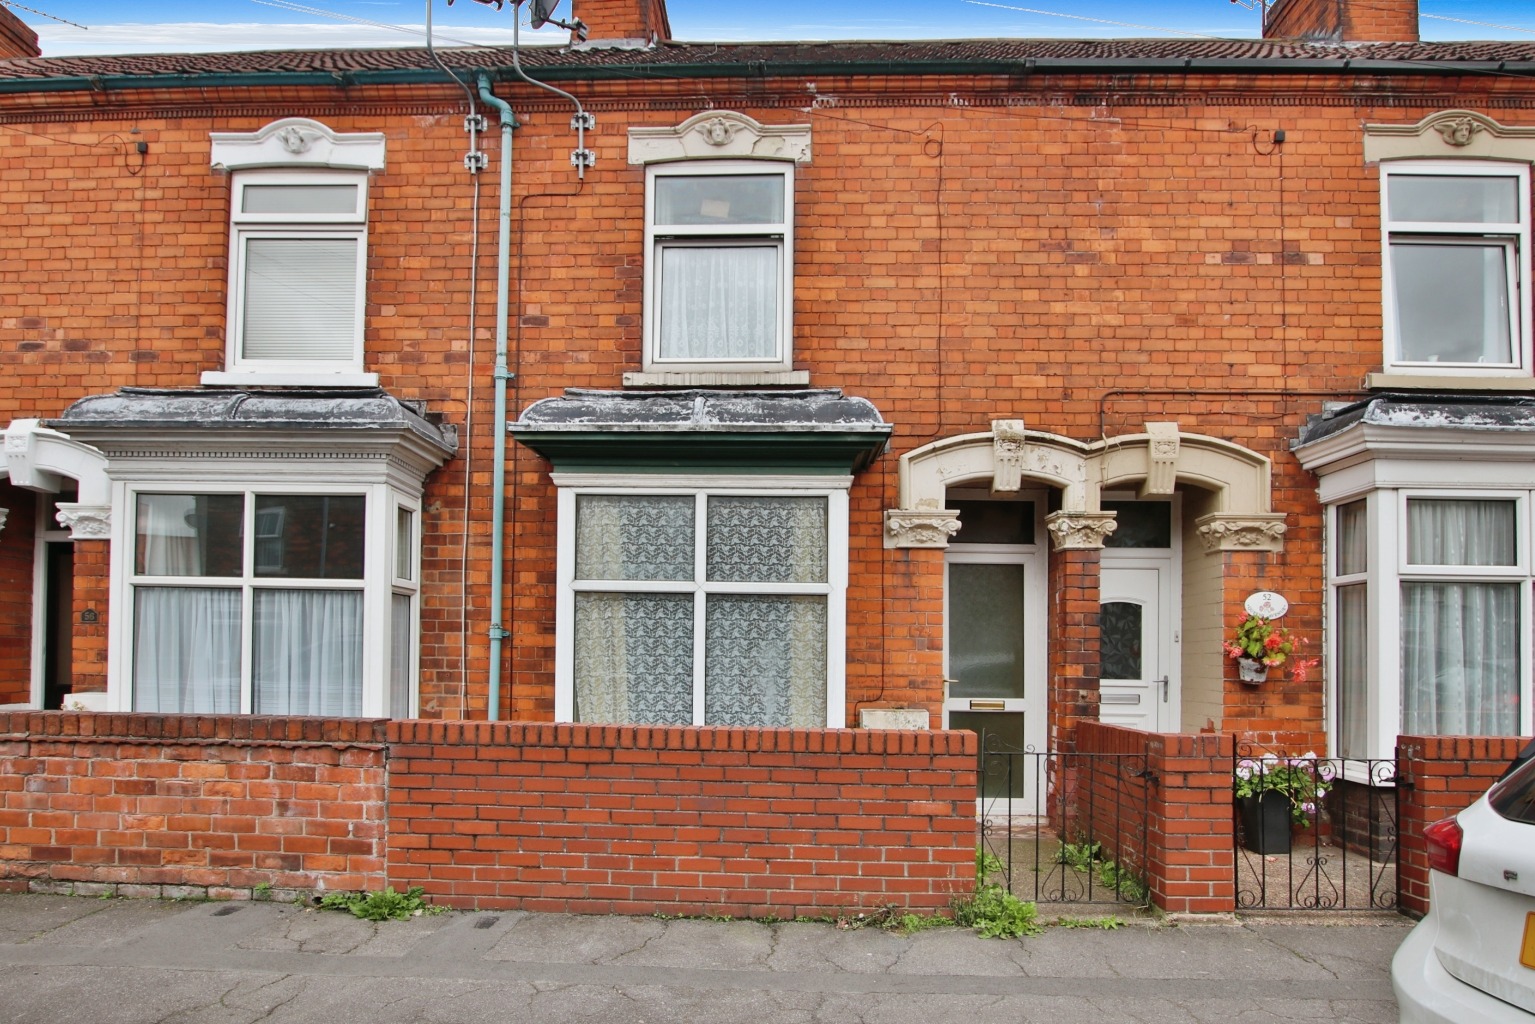 3 bed terraced house for sale in Queens Avenue, Barton upon Humber - Property Image 1